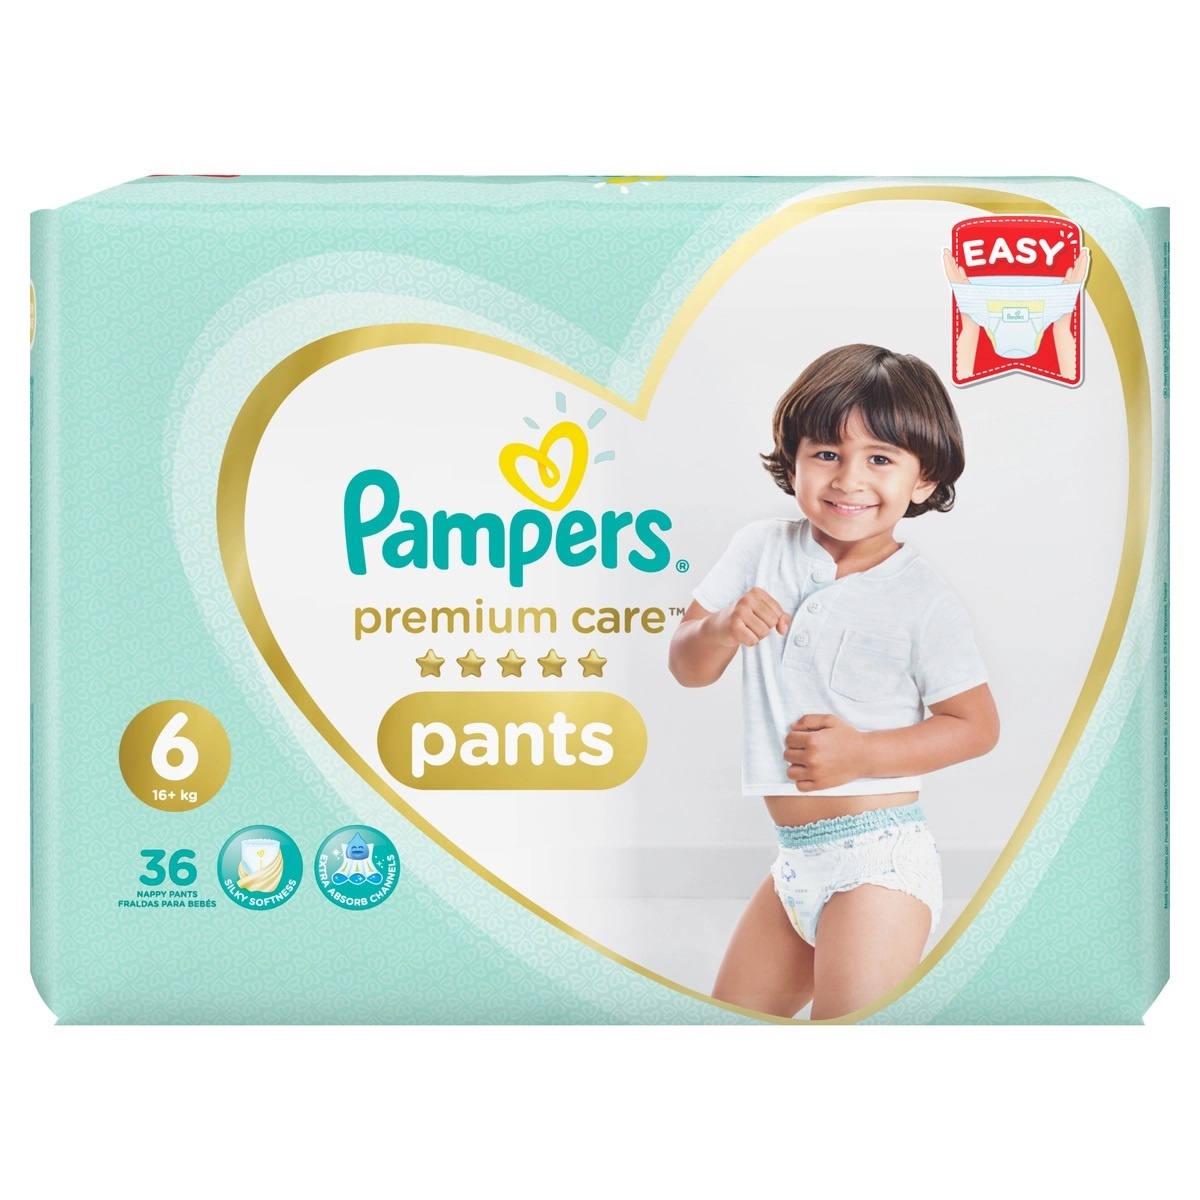 Pampers Premium Protection Size 6, 28 Nappies, 13kg+, Essential